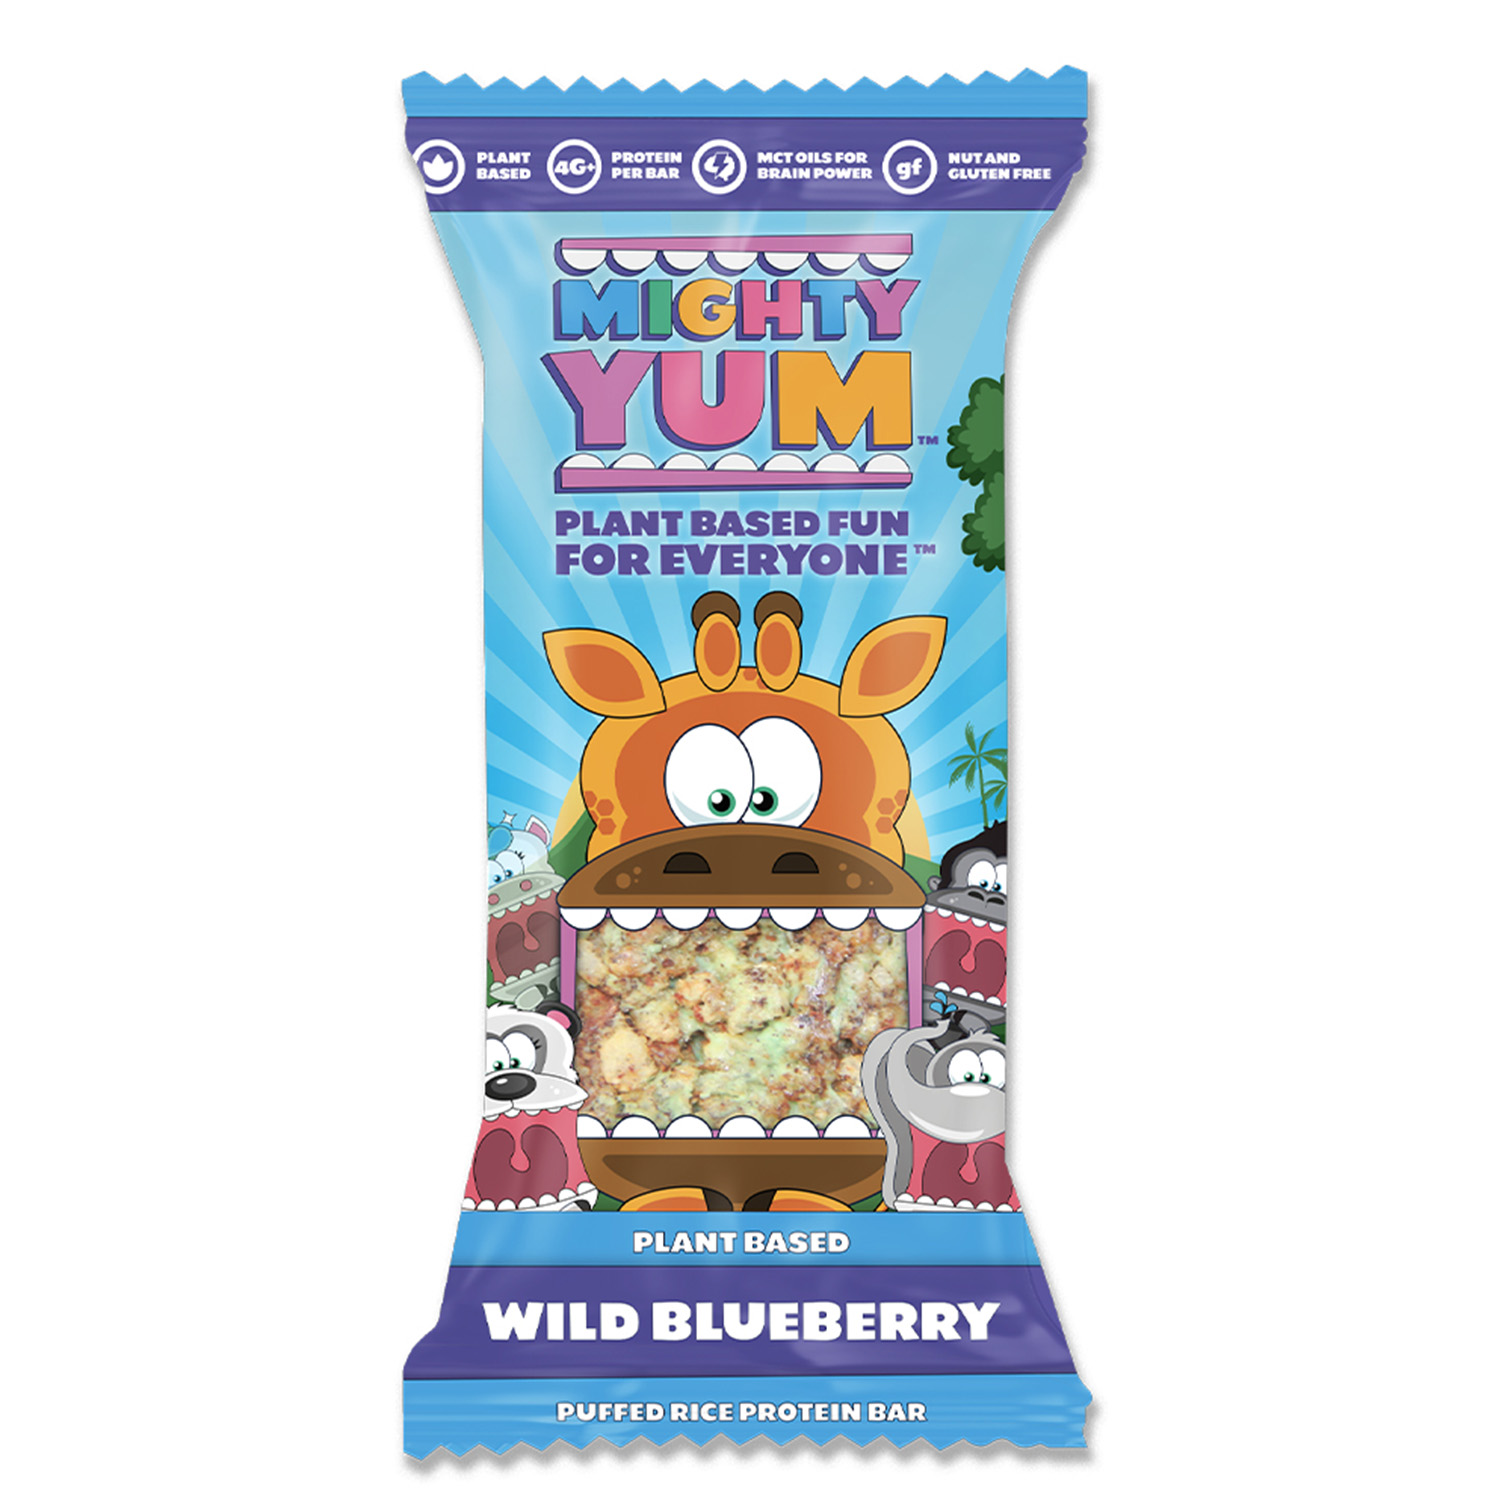 Mighty Yum Plant-Based Wild Blueberry Protein Bar - Individual 12 innerpacks per case 1.0 oz